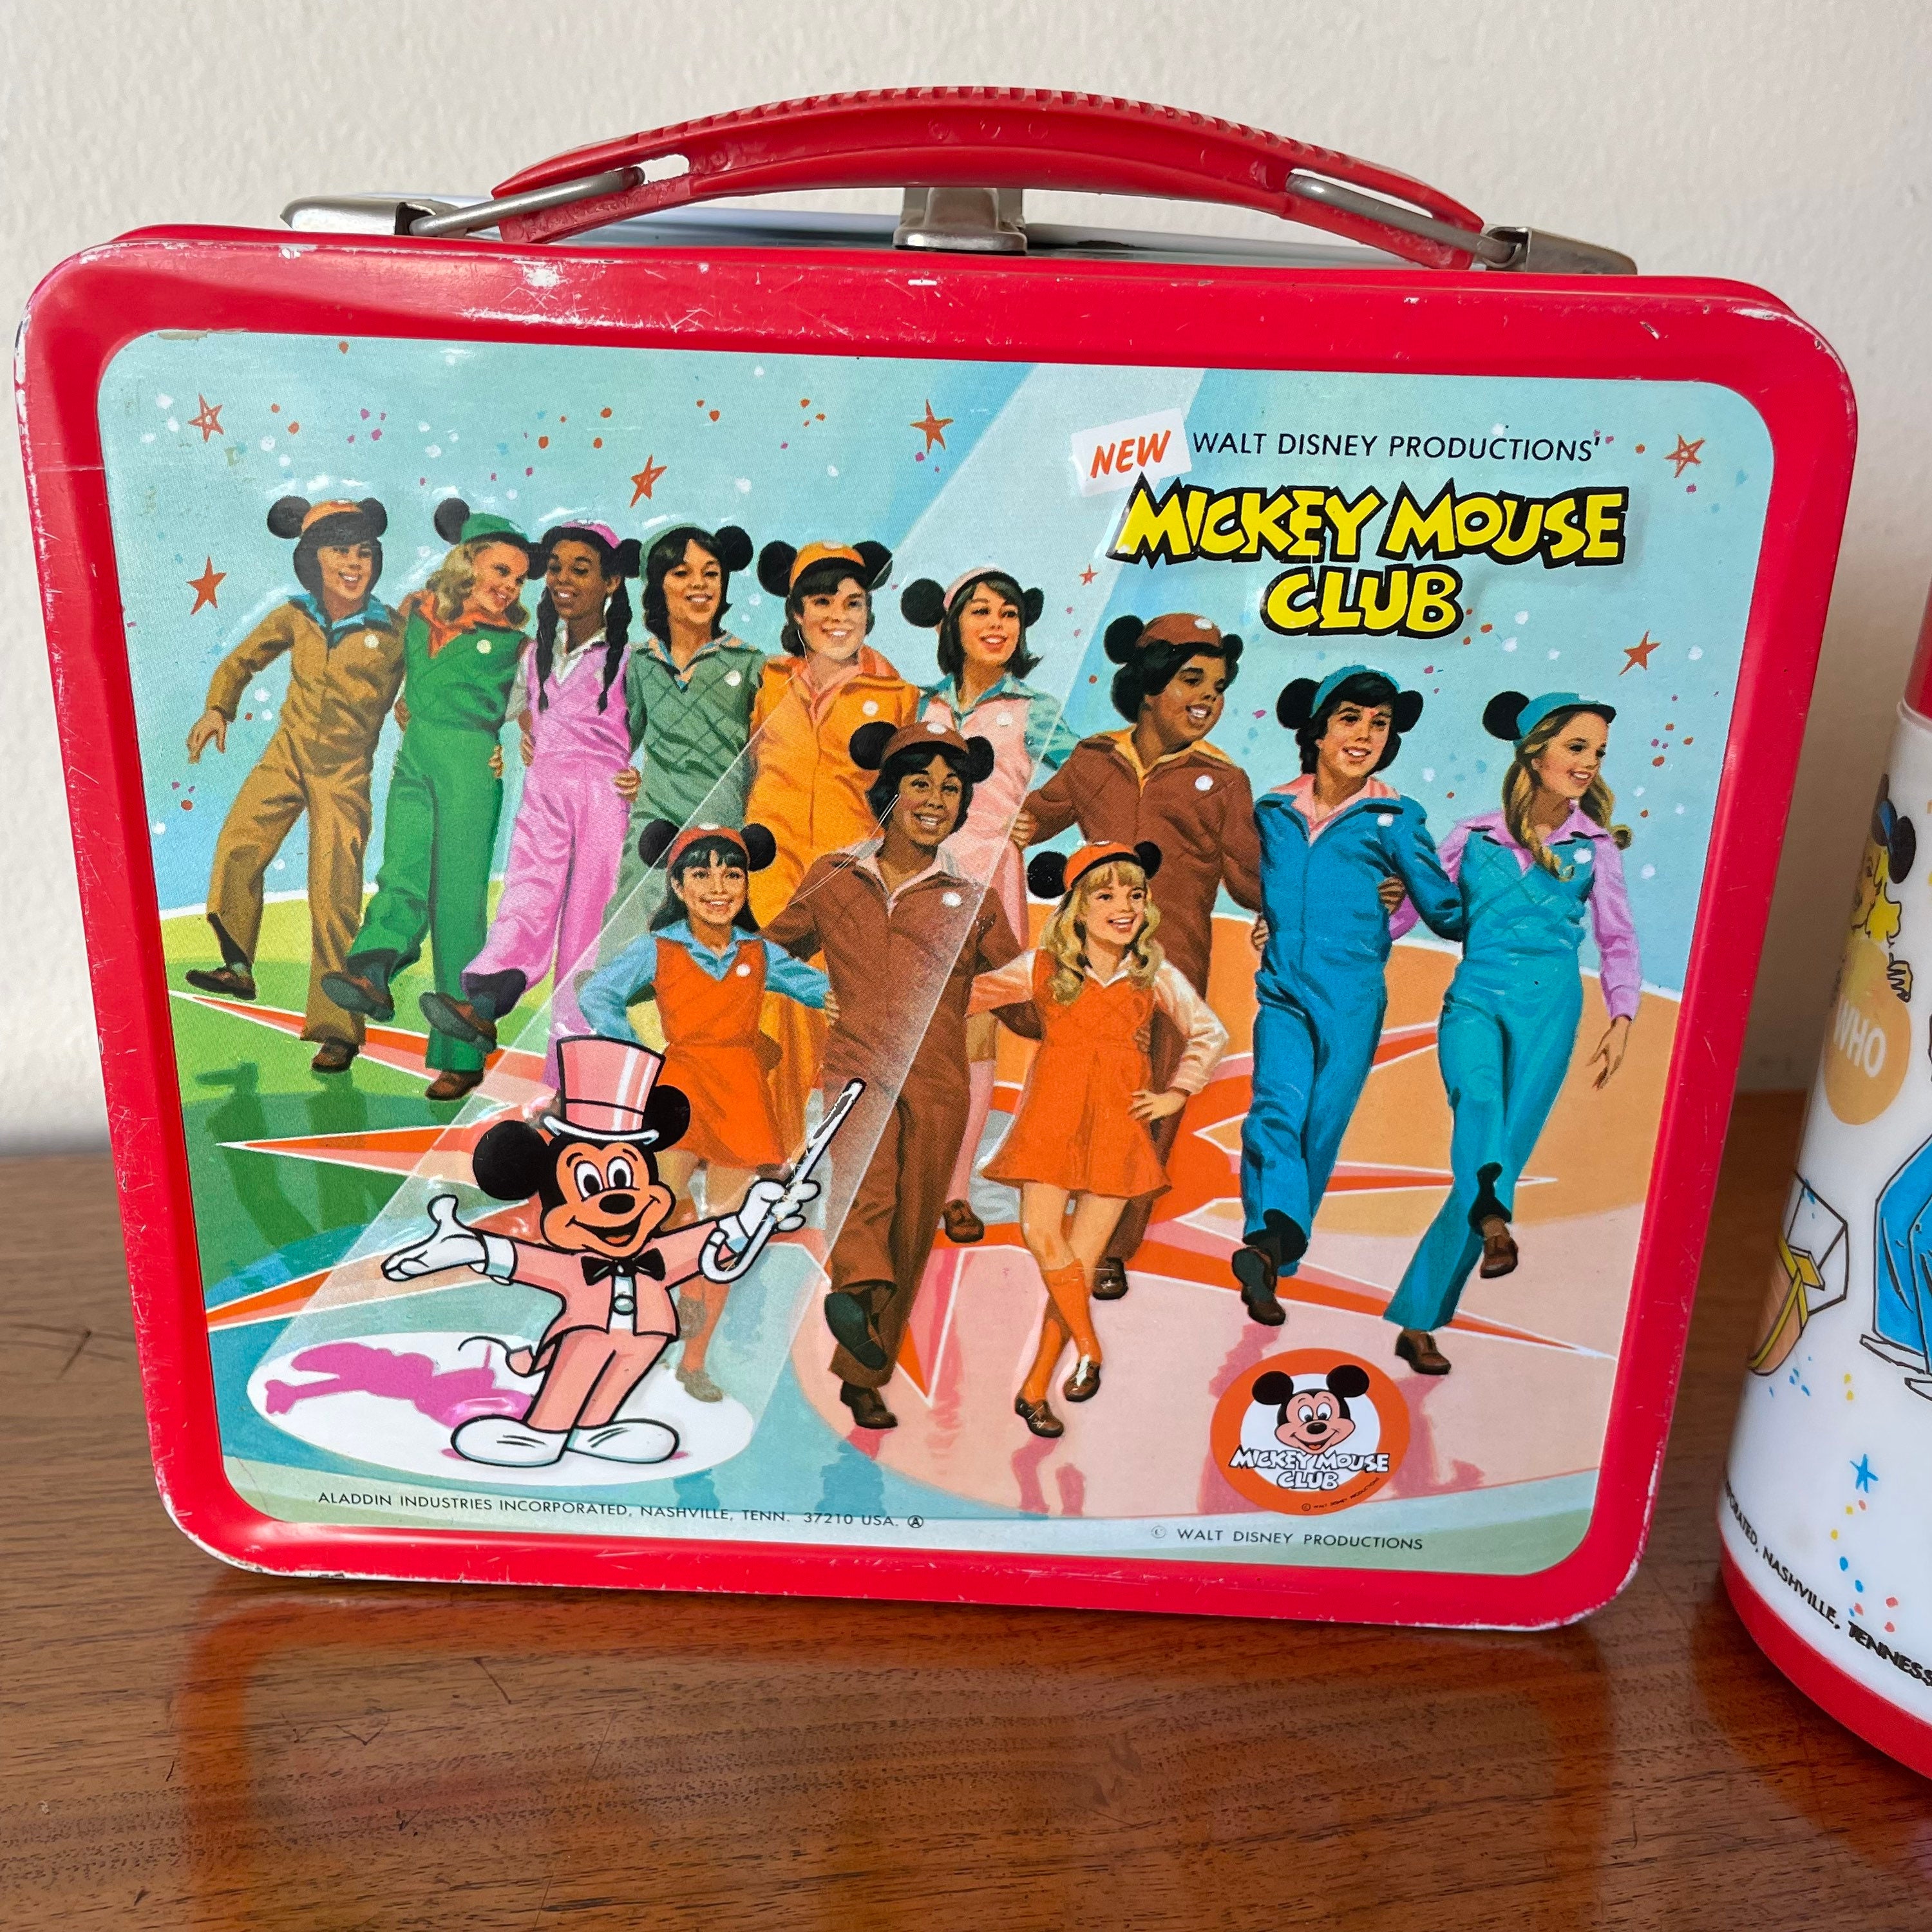 Mickey Mouse Club Rare Disney metal lunch box and metal Thermos